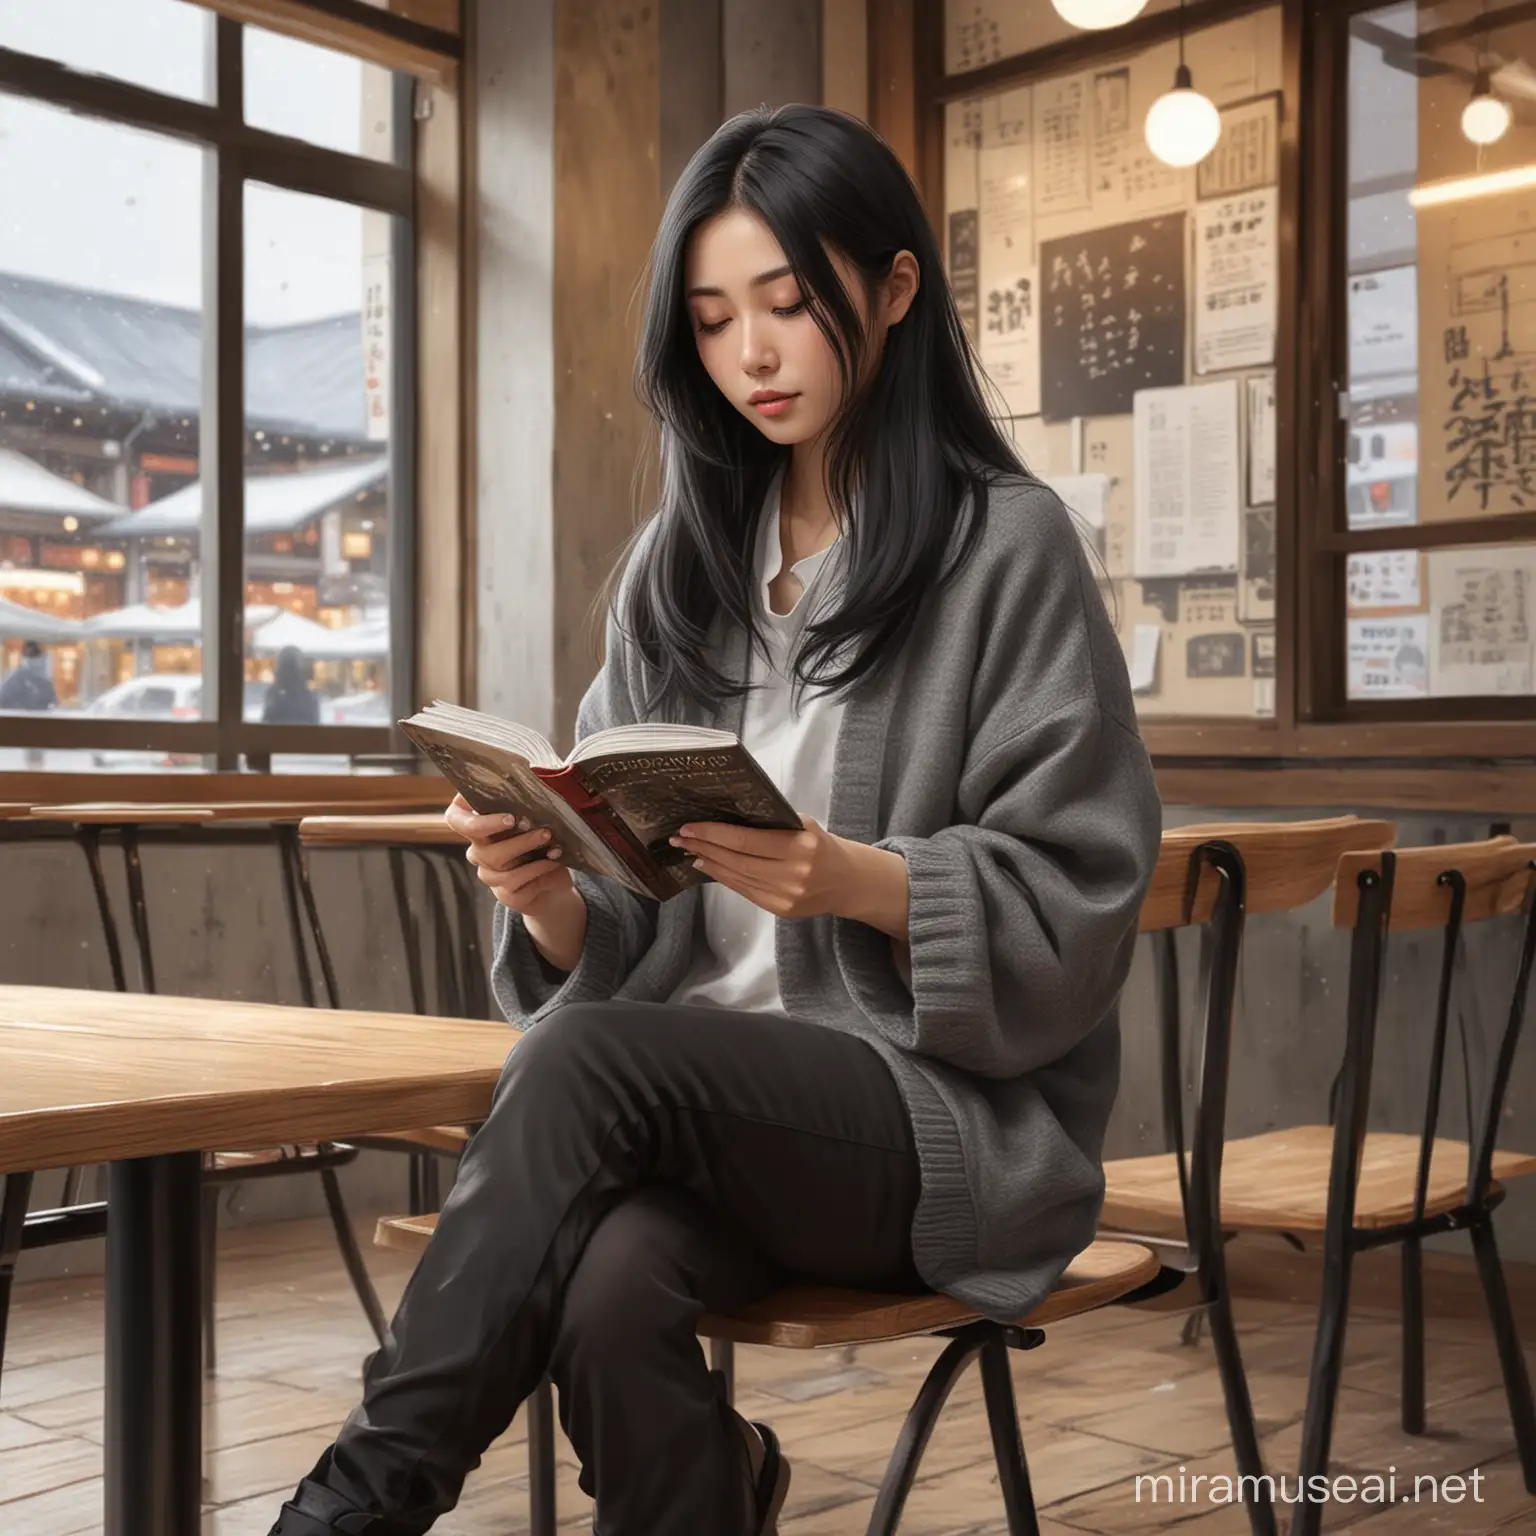 Stylish Japanese Woman Reading Book in Cozy Winter Cafe Scene